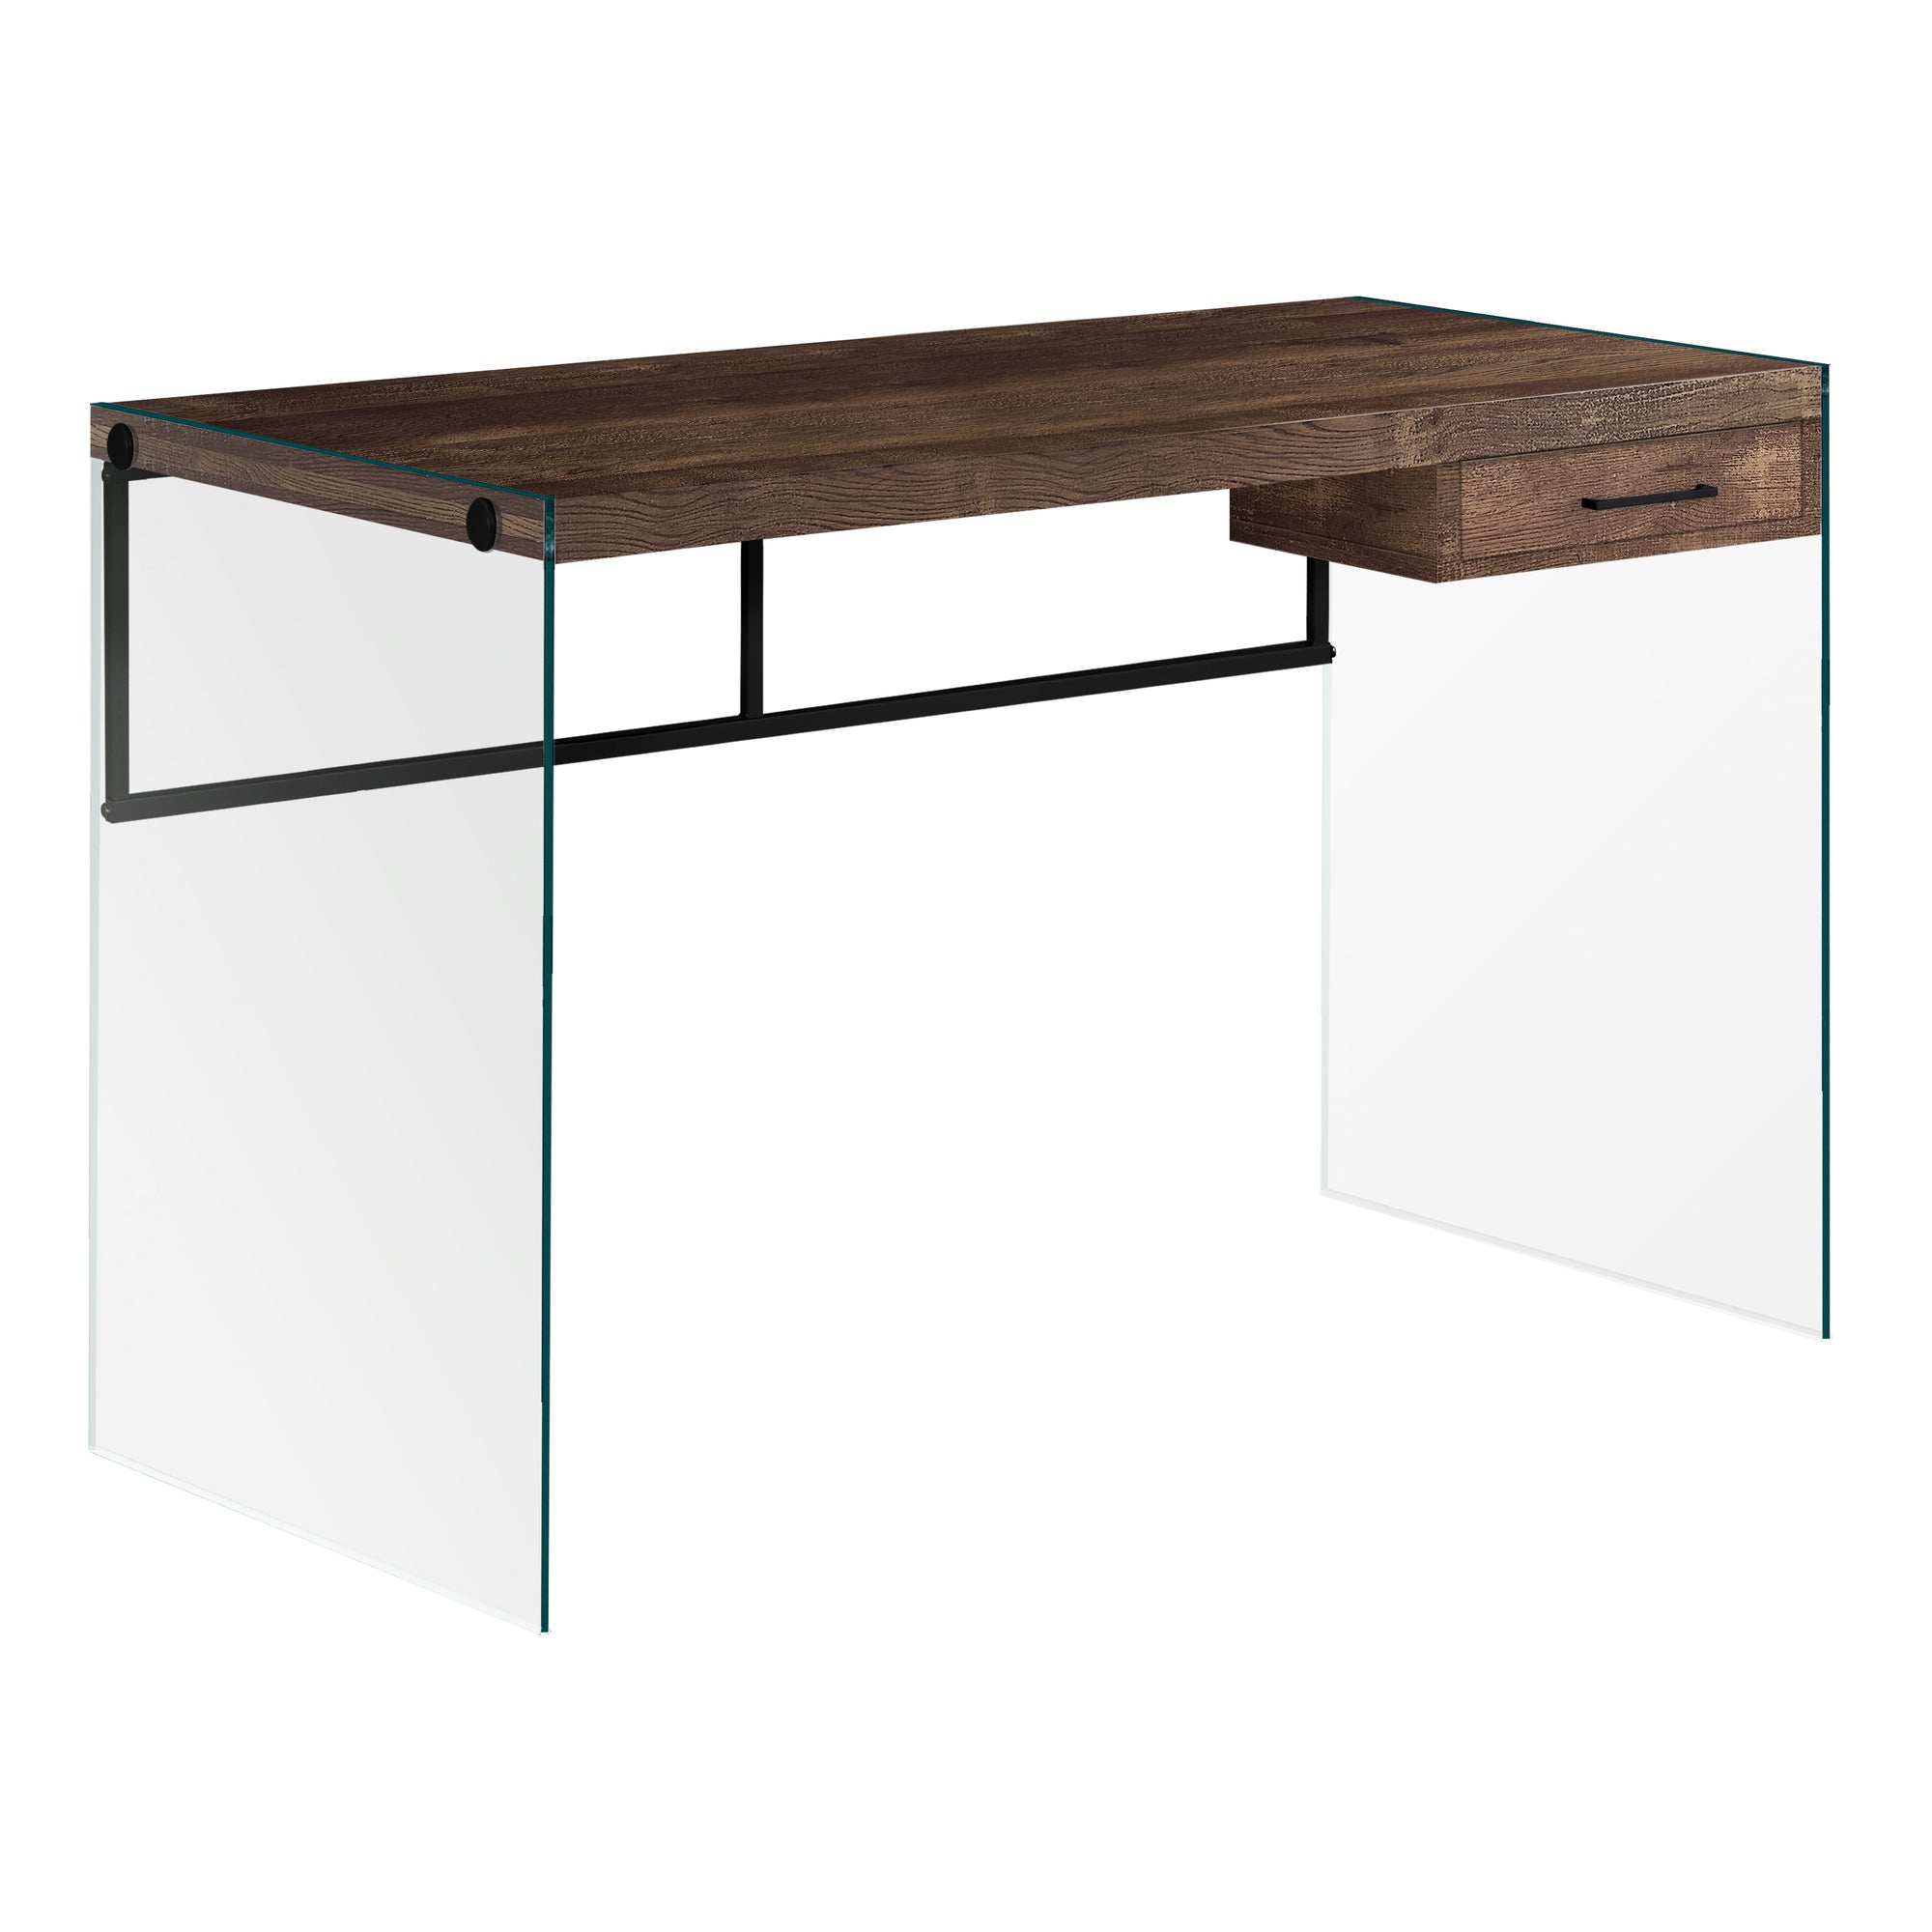 MN-137444    Computer Desk, Home Office, Laptop, Tempered Glass, Storage Drawers, 48"L, Tempered Glass, Laminate, Brown Reclaimed Wood Look, Contemporary, Modern